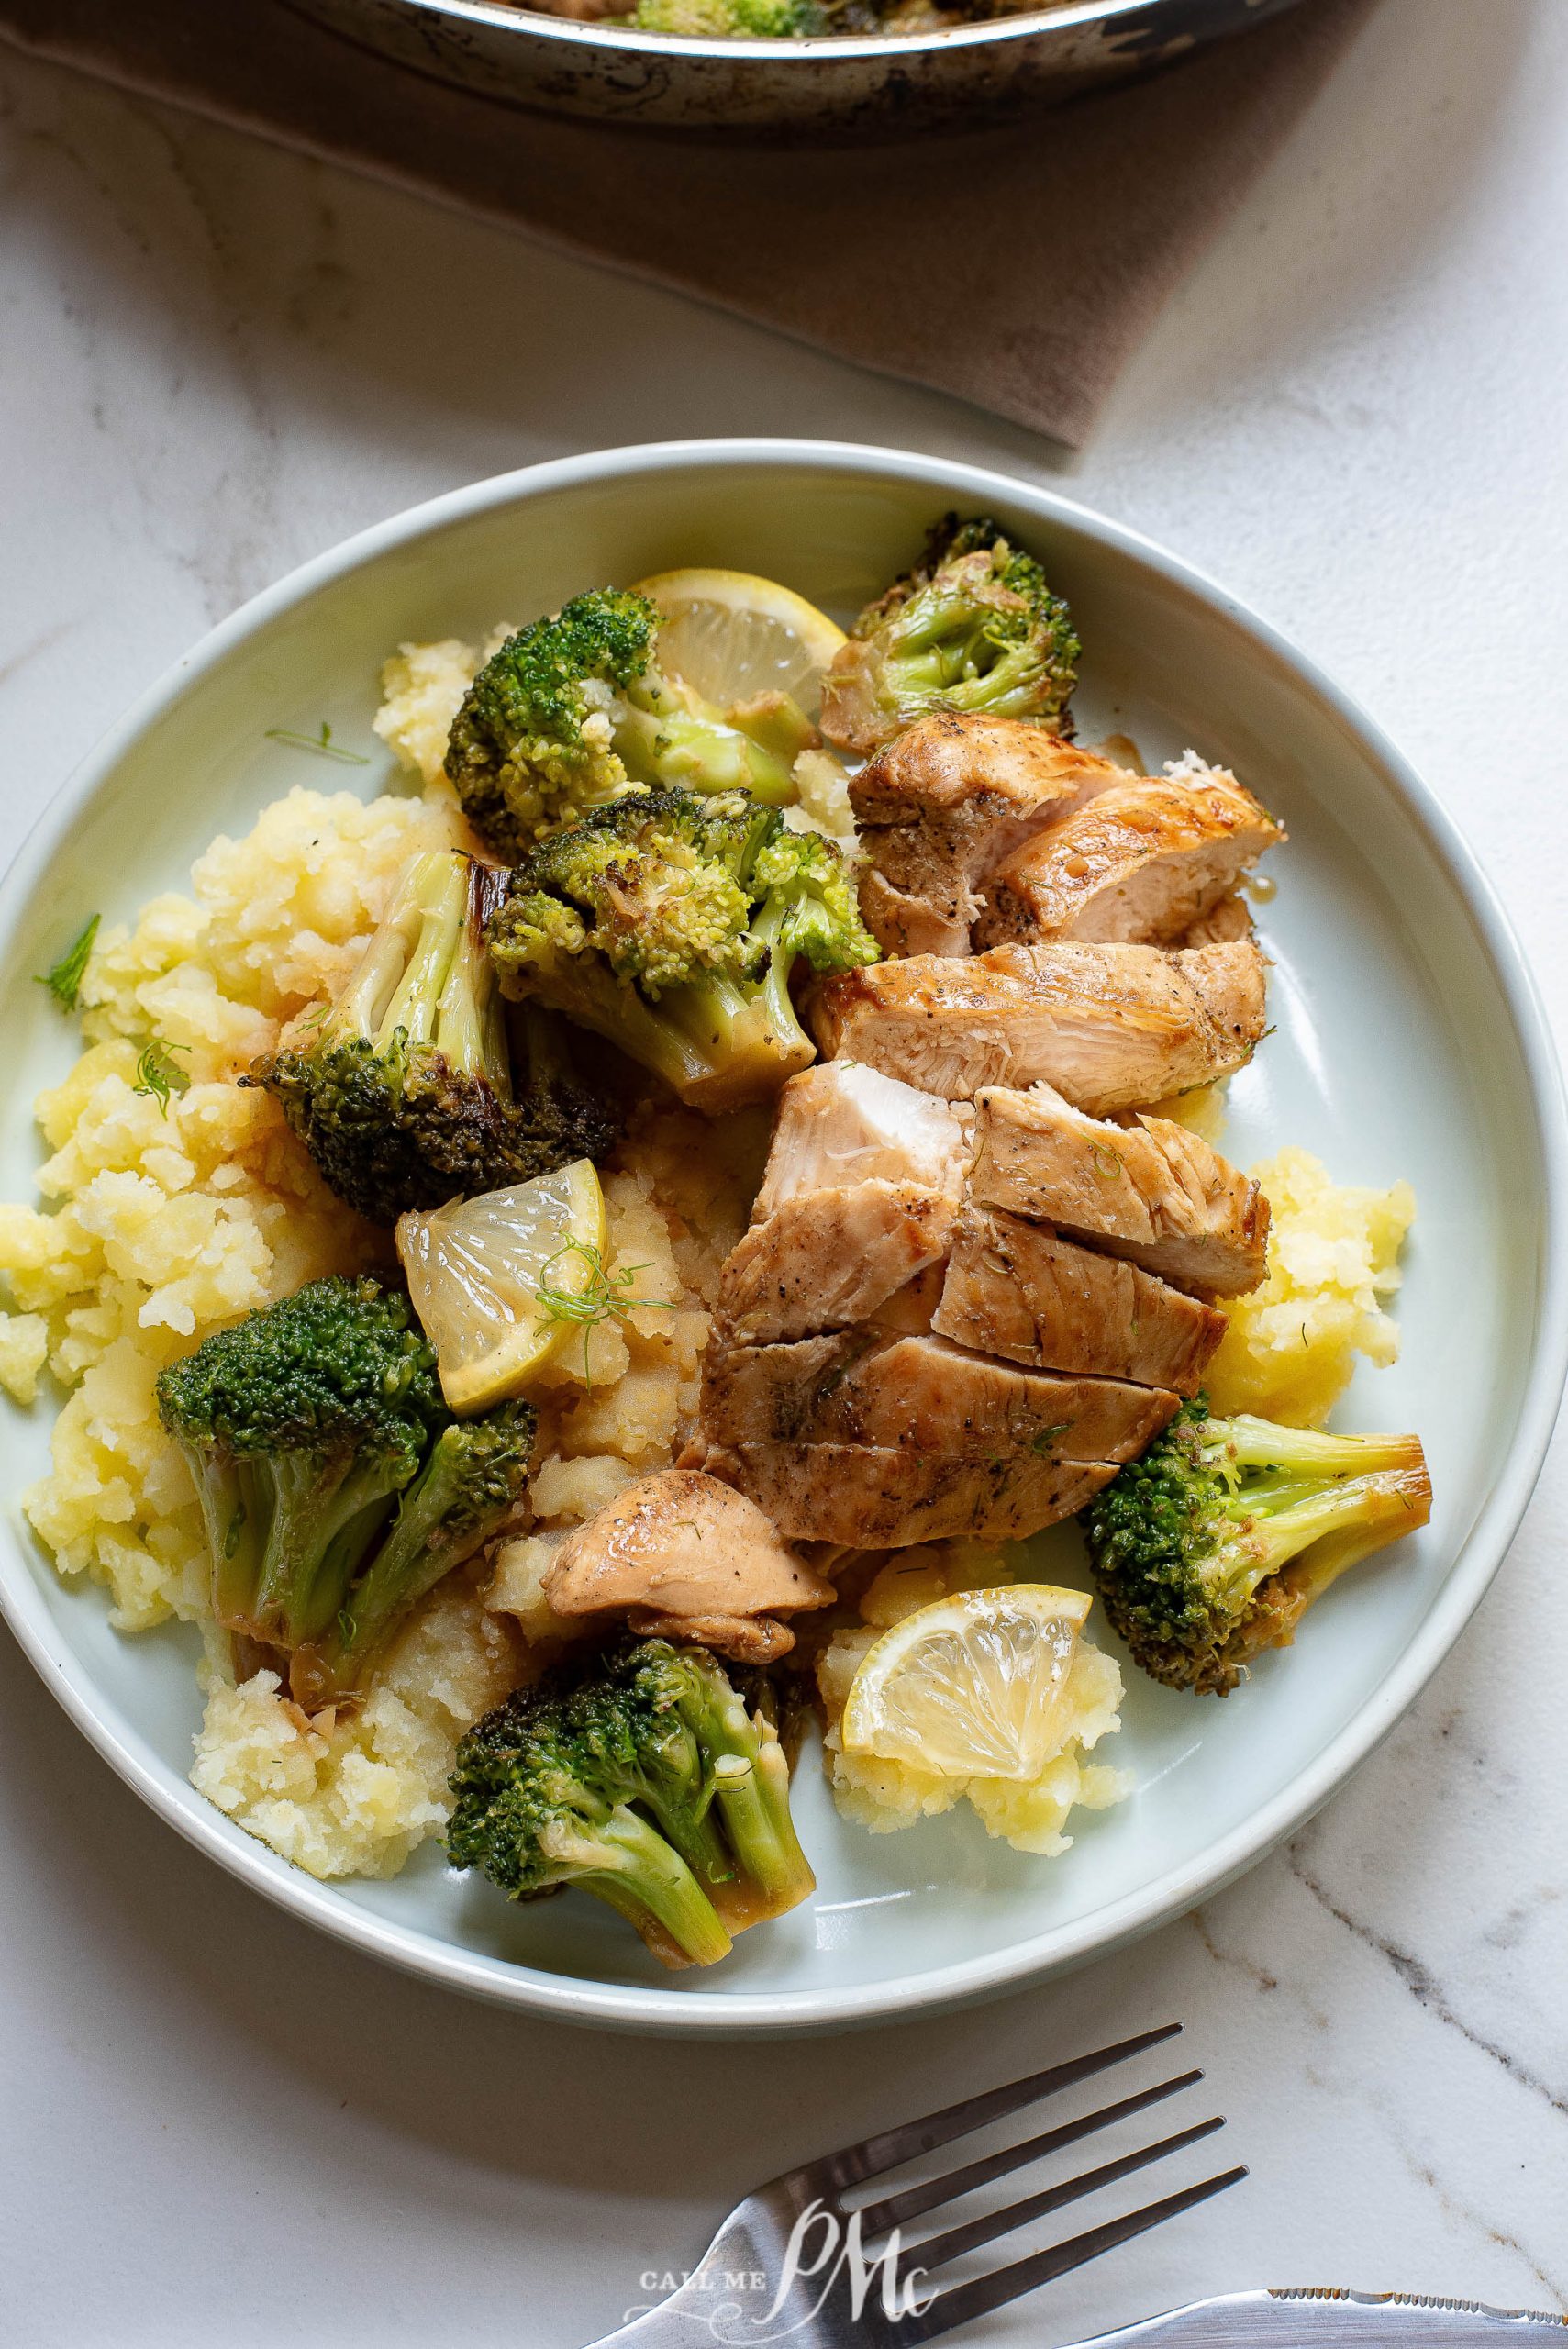 Grilled chicken breast slices with broccoli and mashed cauliflower on a plate.